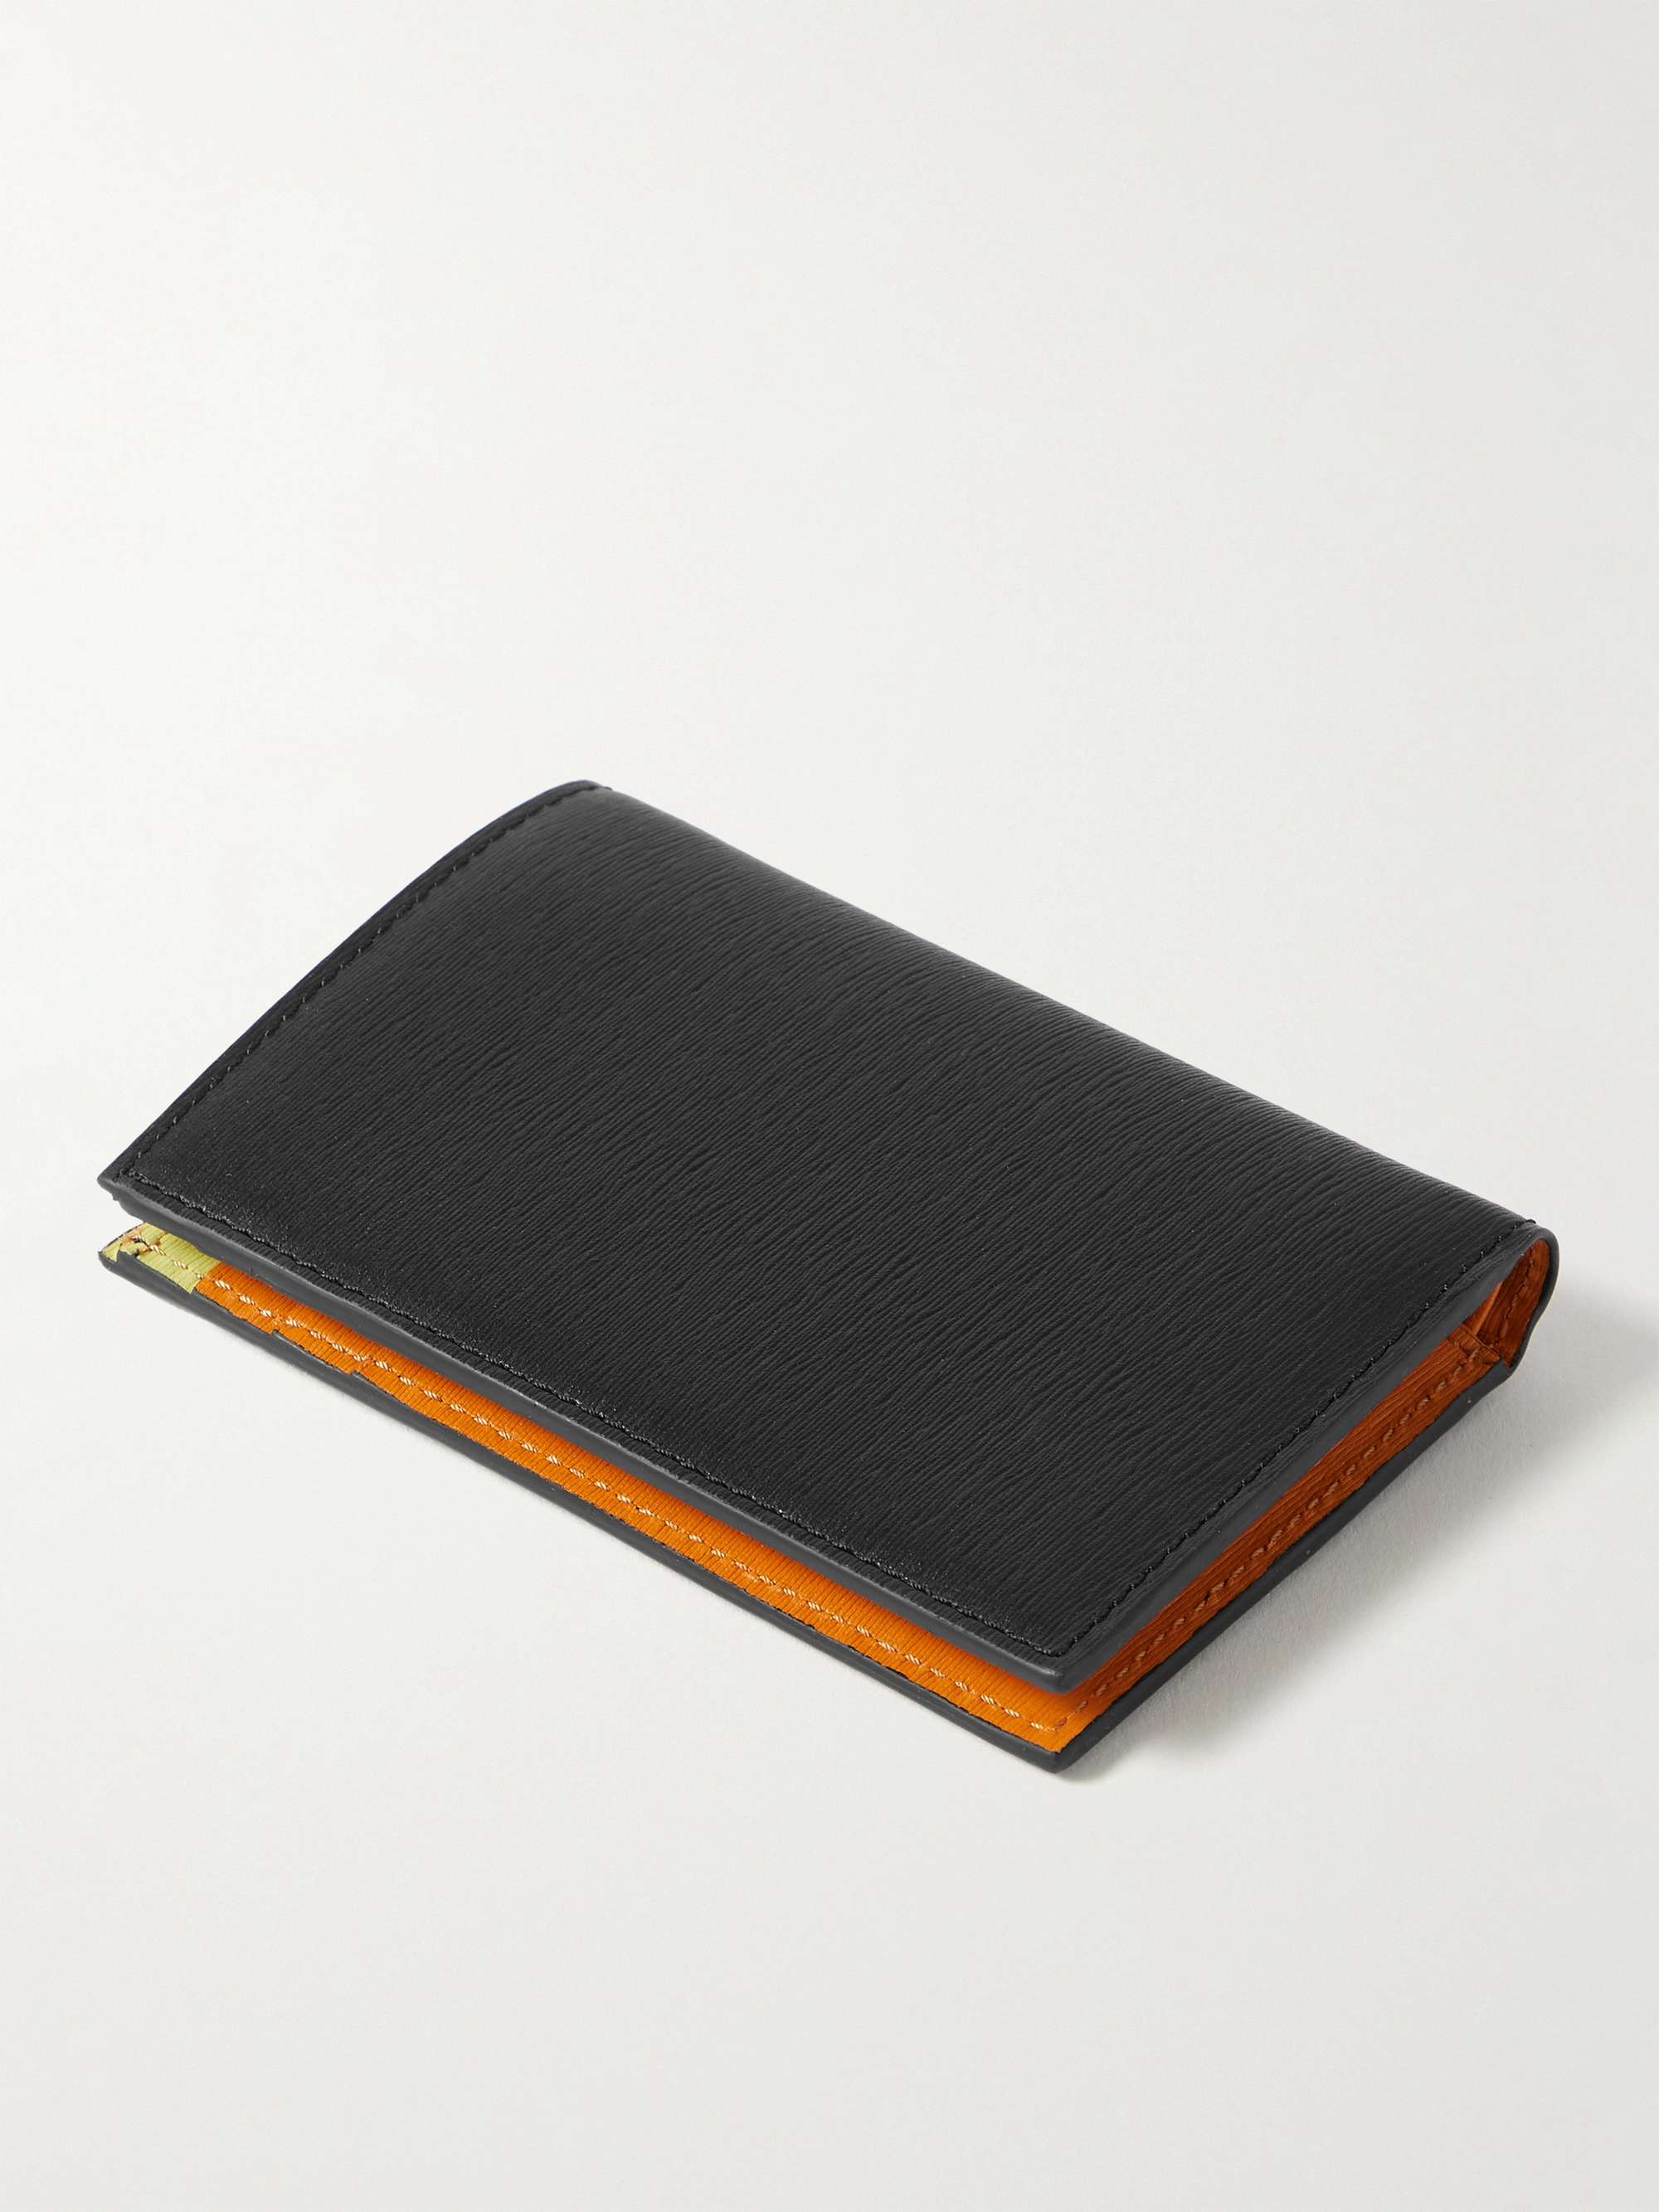 PAUL SMITH Textured-Leather Wallet | MR PORTER